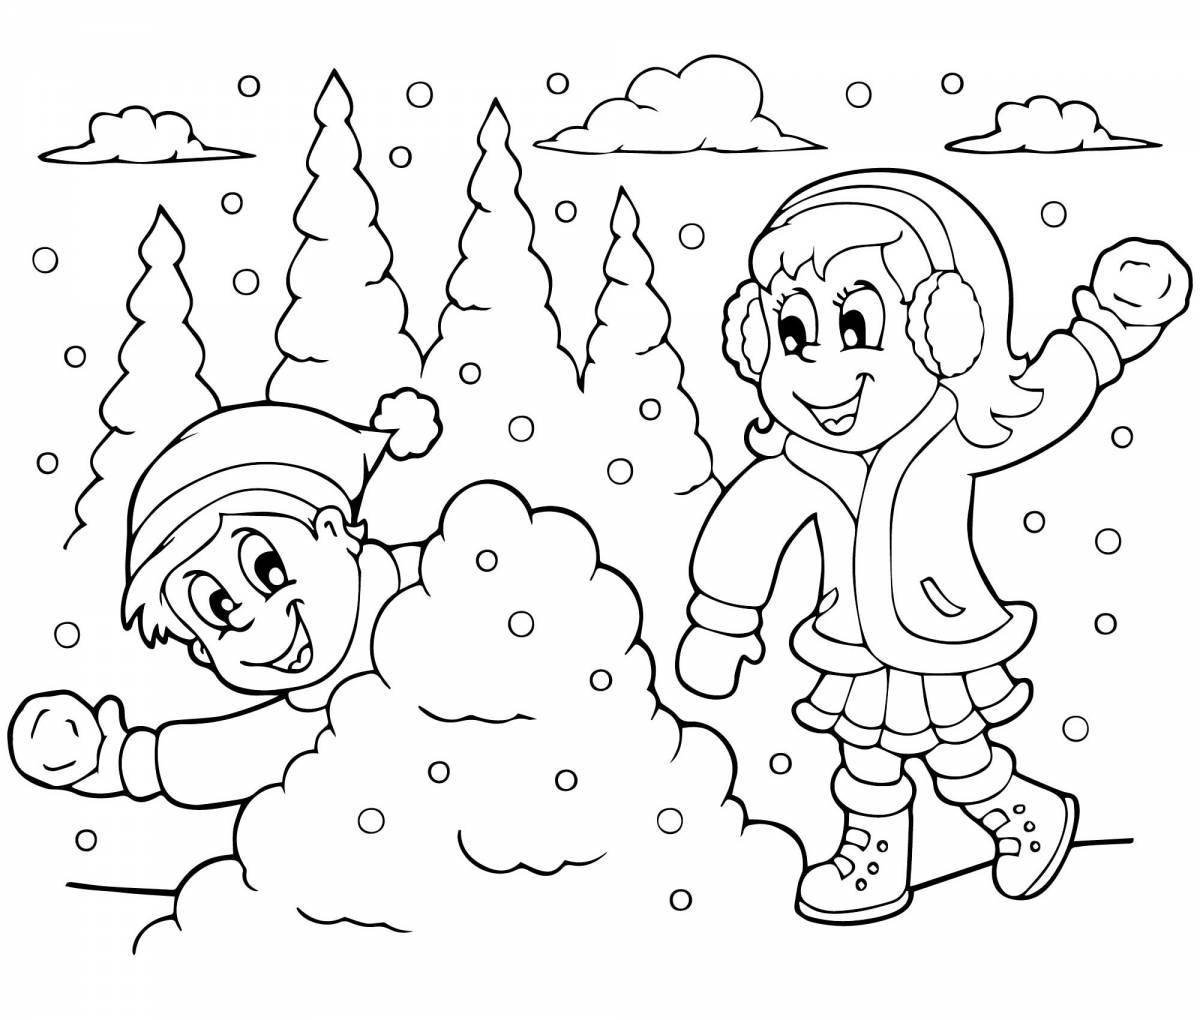 Playful winter coloring for children